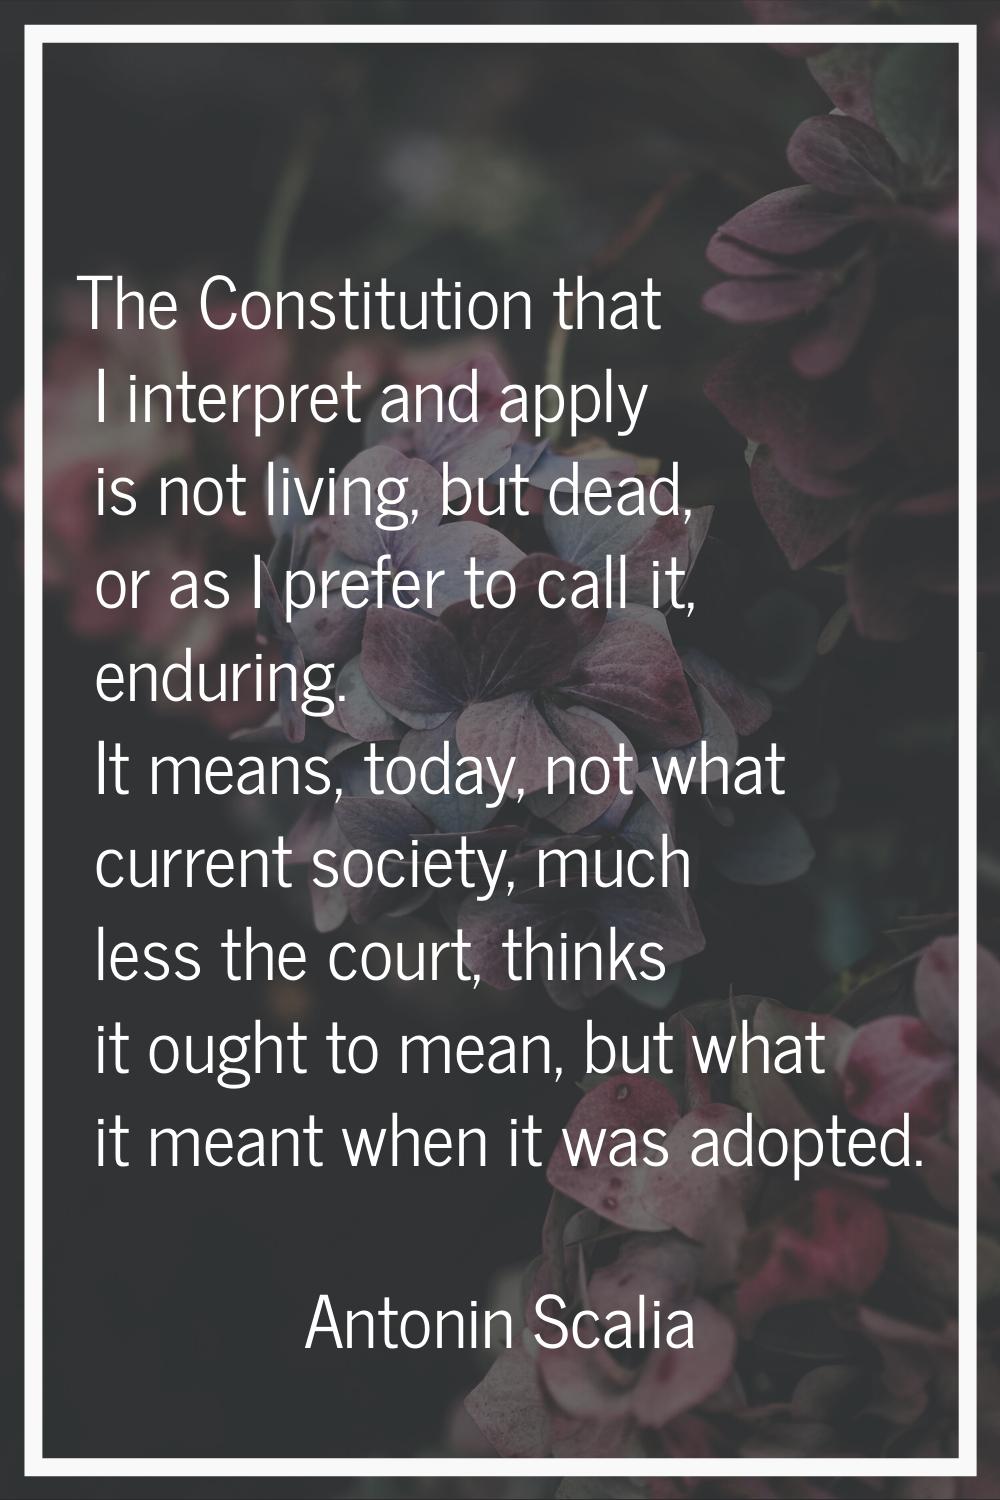 The Constitution that I interpret and apply is not living, but dead, or as I prefer to call it, end